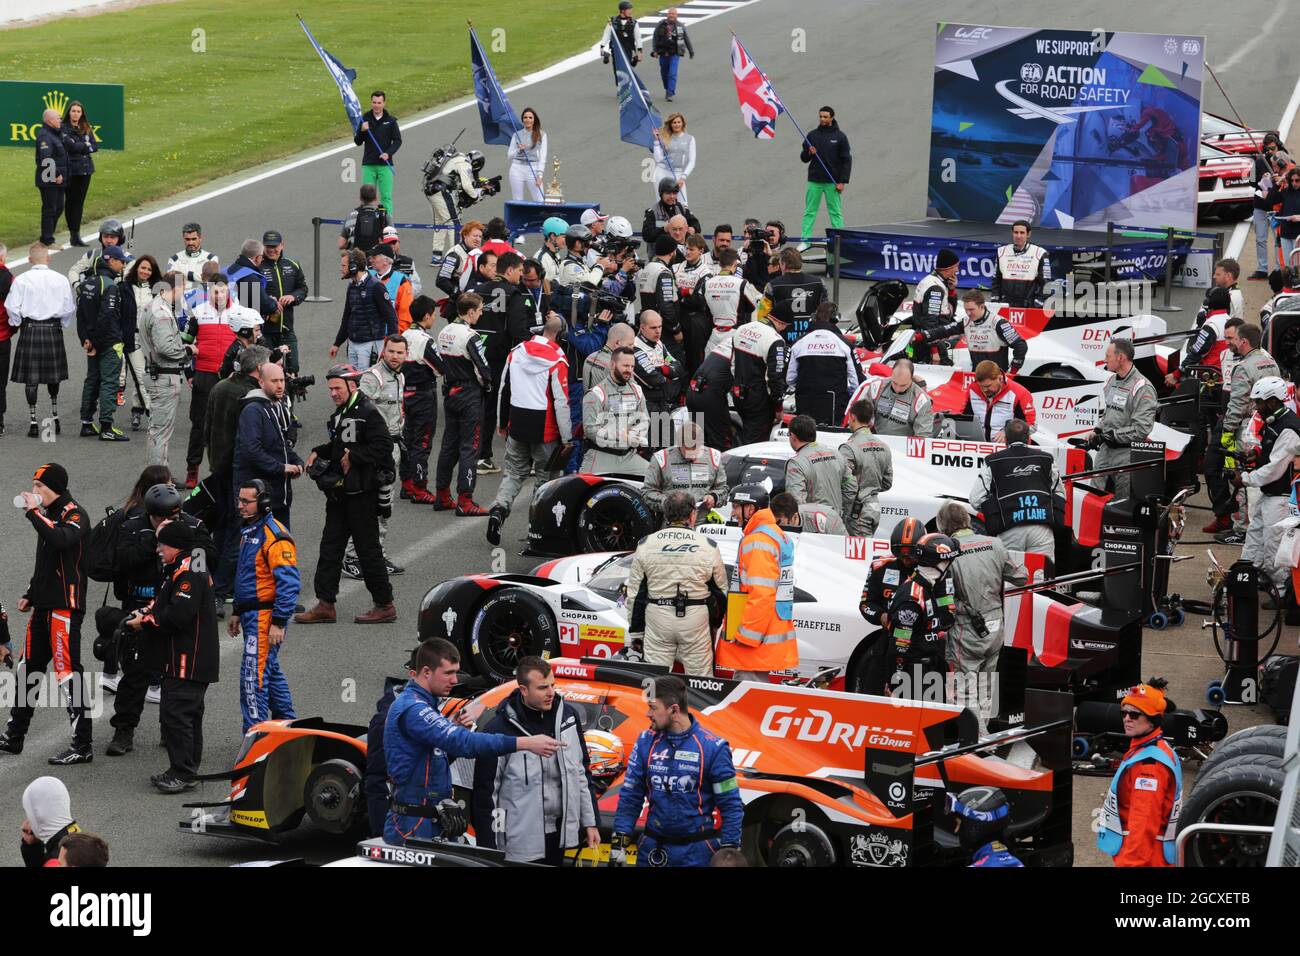 The grid before the start of the race. FIA World Endurance Championship, Round 1, Sunday 16th April 2017. Silverstone, England. Stock Photo